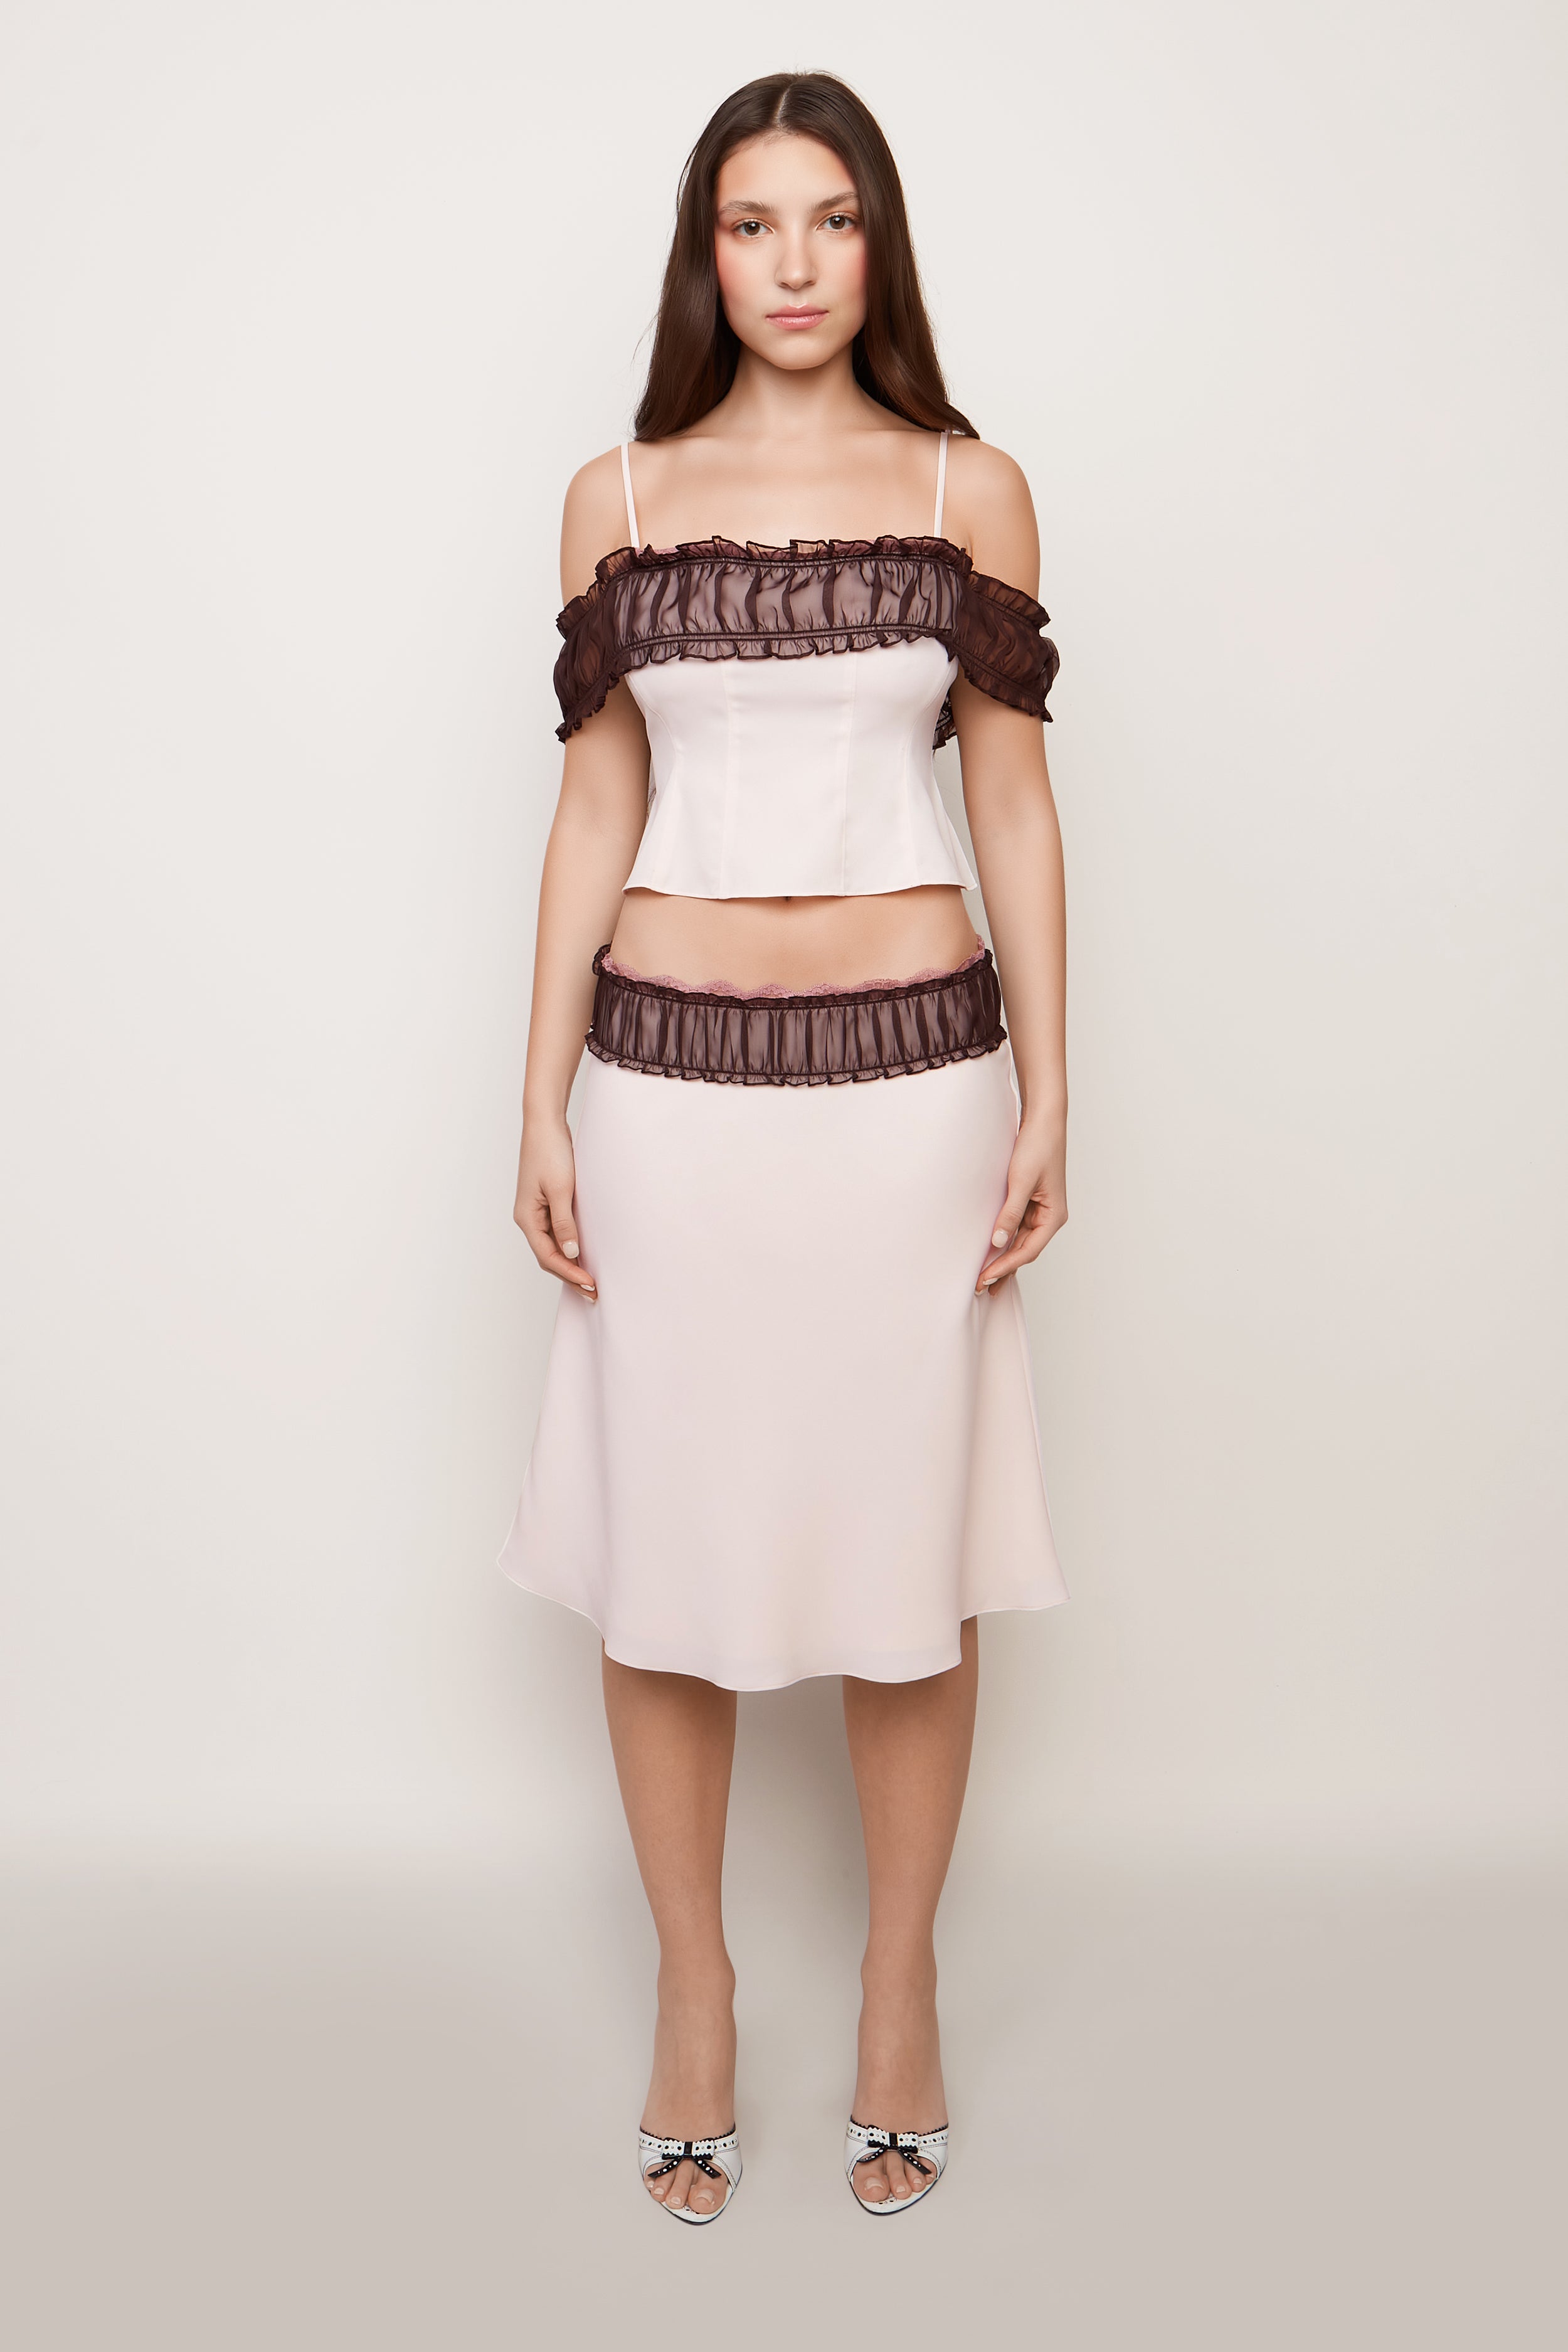 Ruched Chiffon Lace Midi Skirt in Ballet Slipper